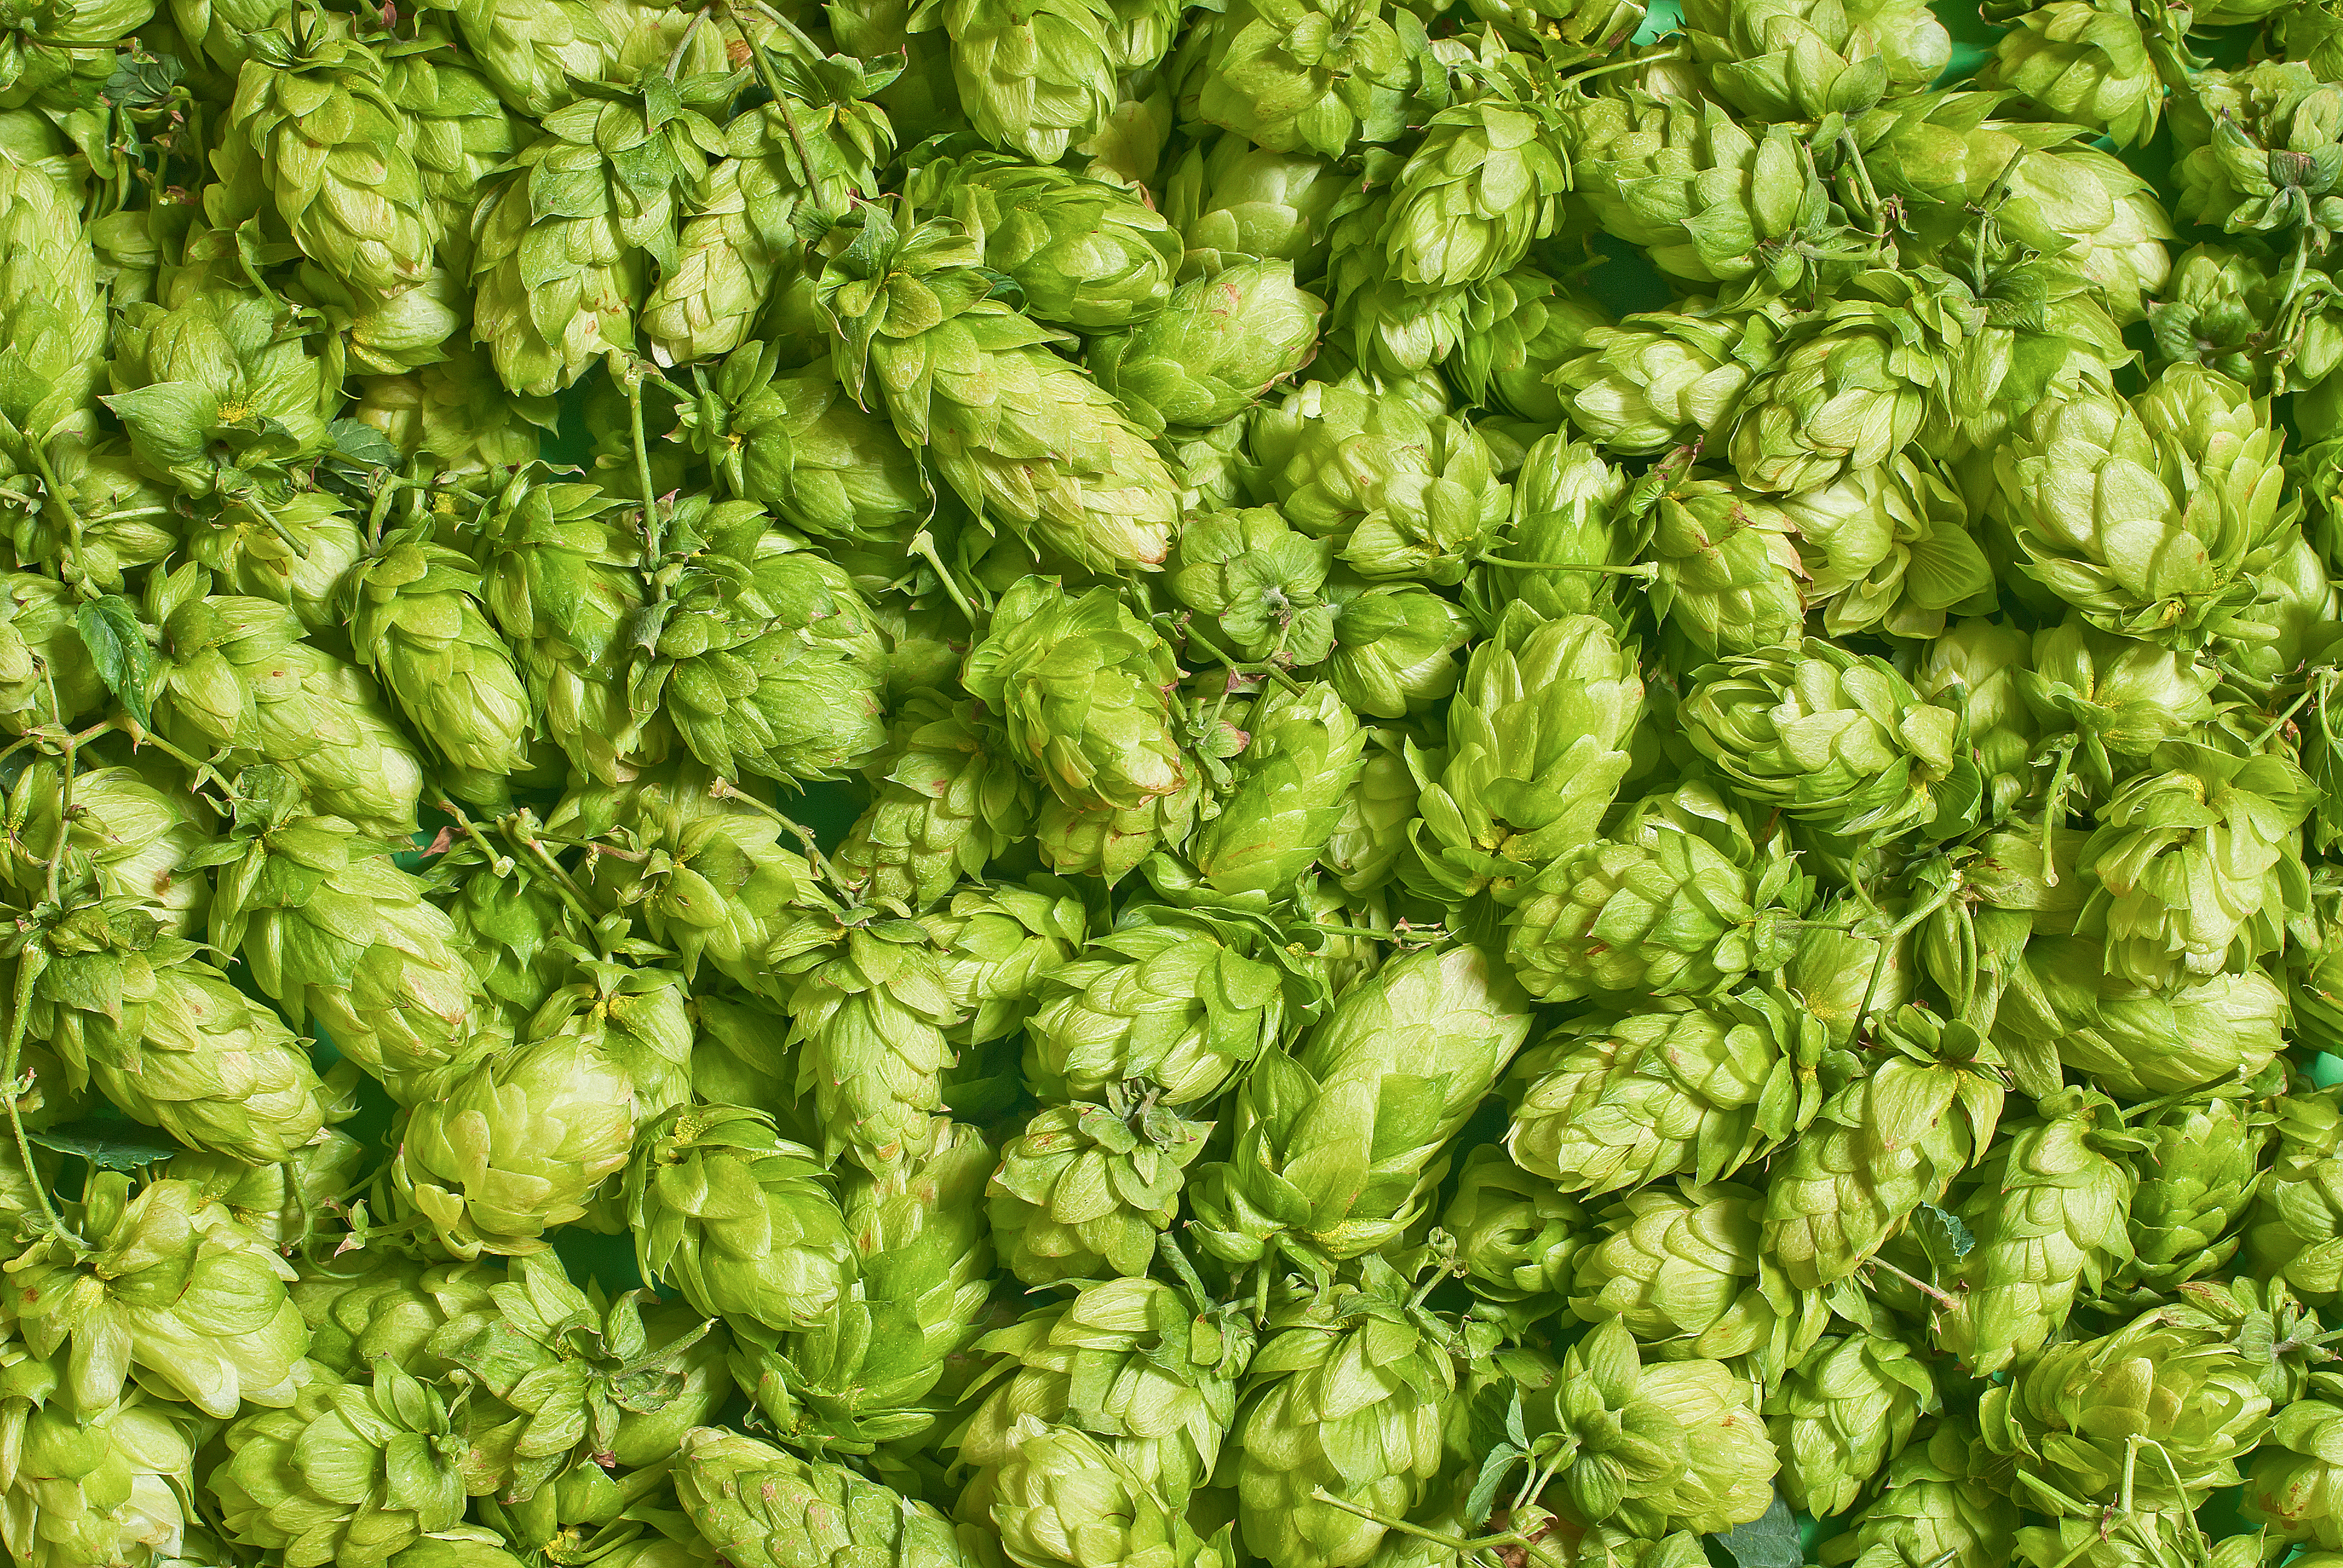 A pile of green hops cones.